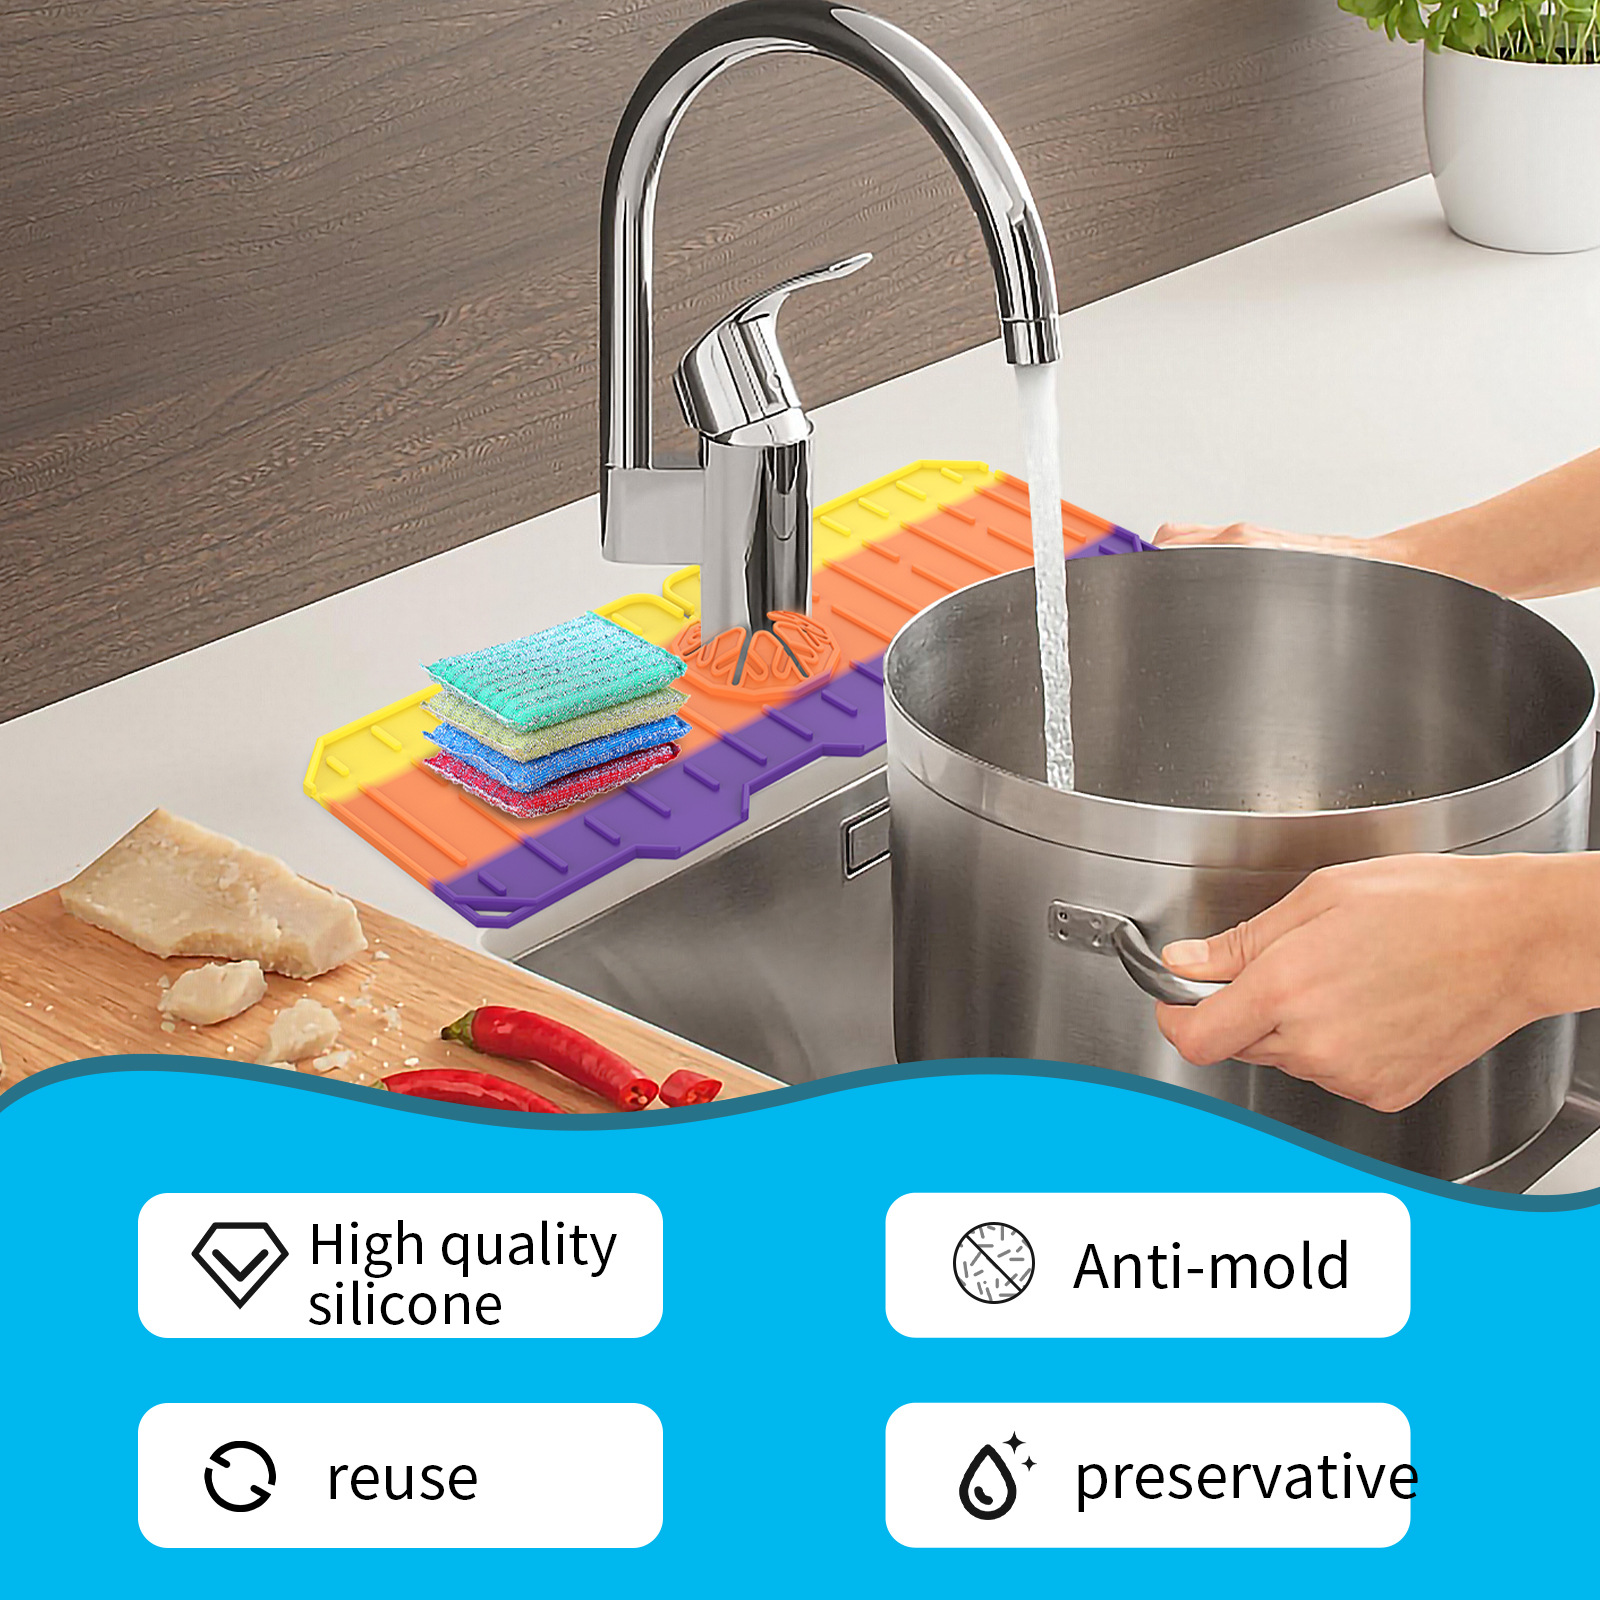 Sink Faucet Guard & Absorption Pad for Kitchen, Bathroom or Laundry, Anti-mould, Quick-Drying, Drip Mat for Sponges, Eliminates Water Marks, Size